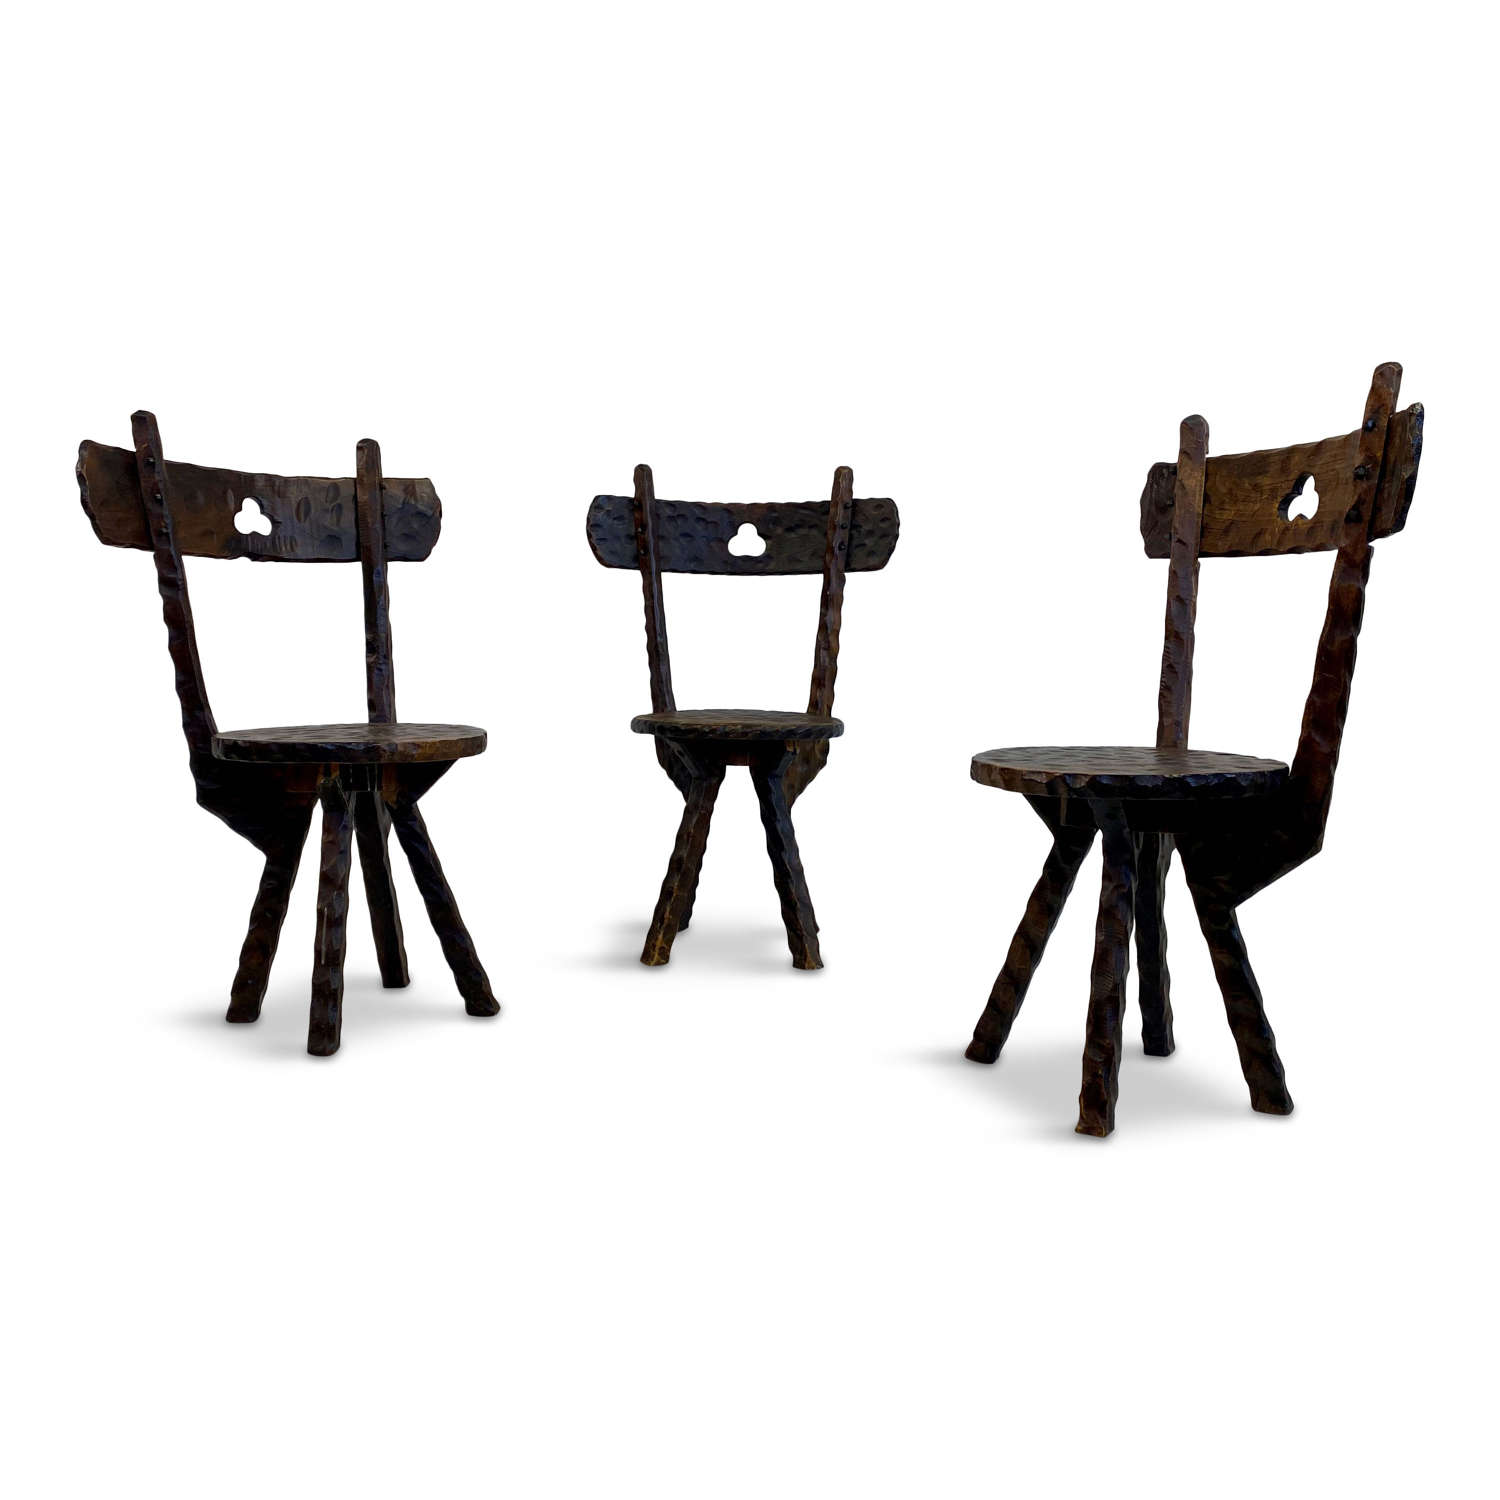 Set of Three Early 20th Century Primitive Folk Chairs